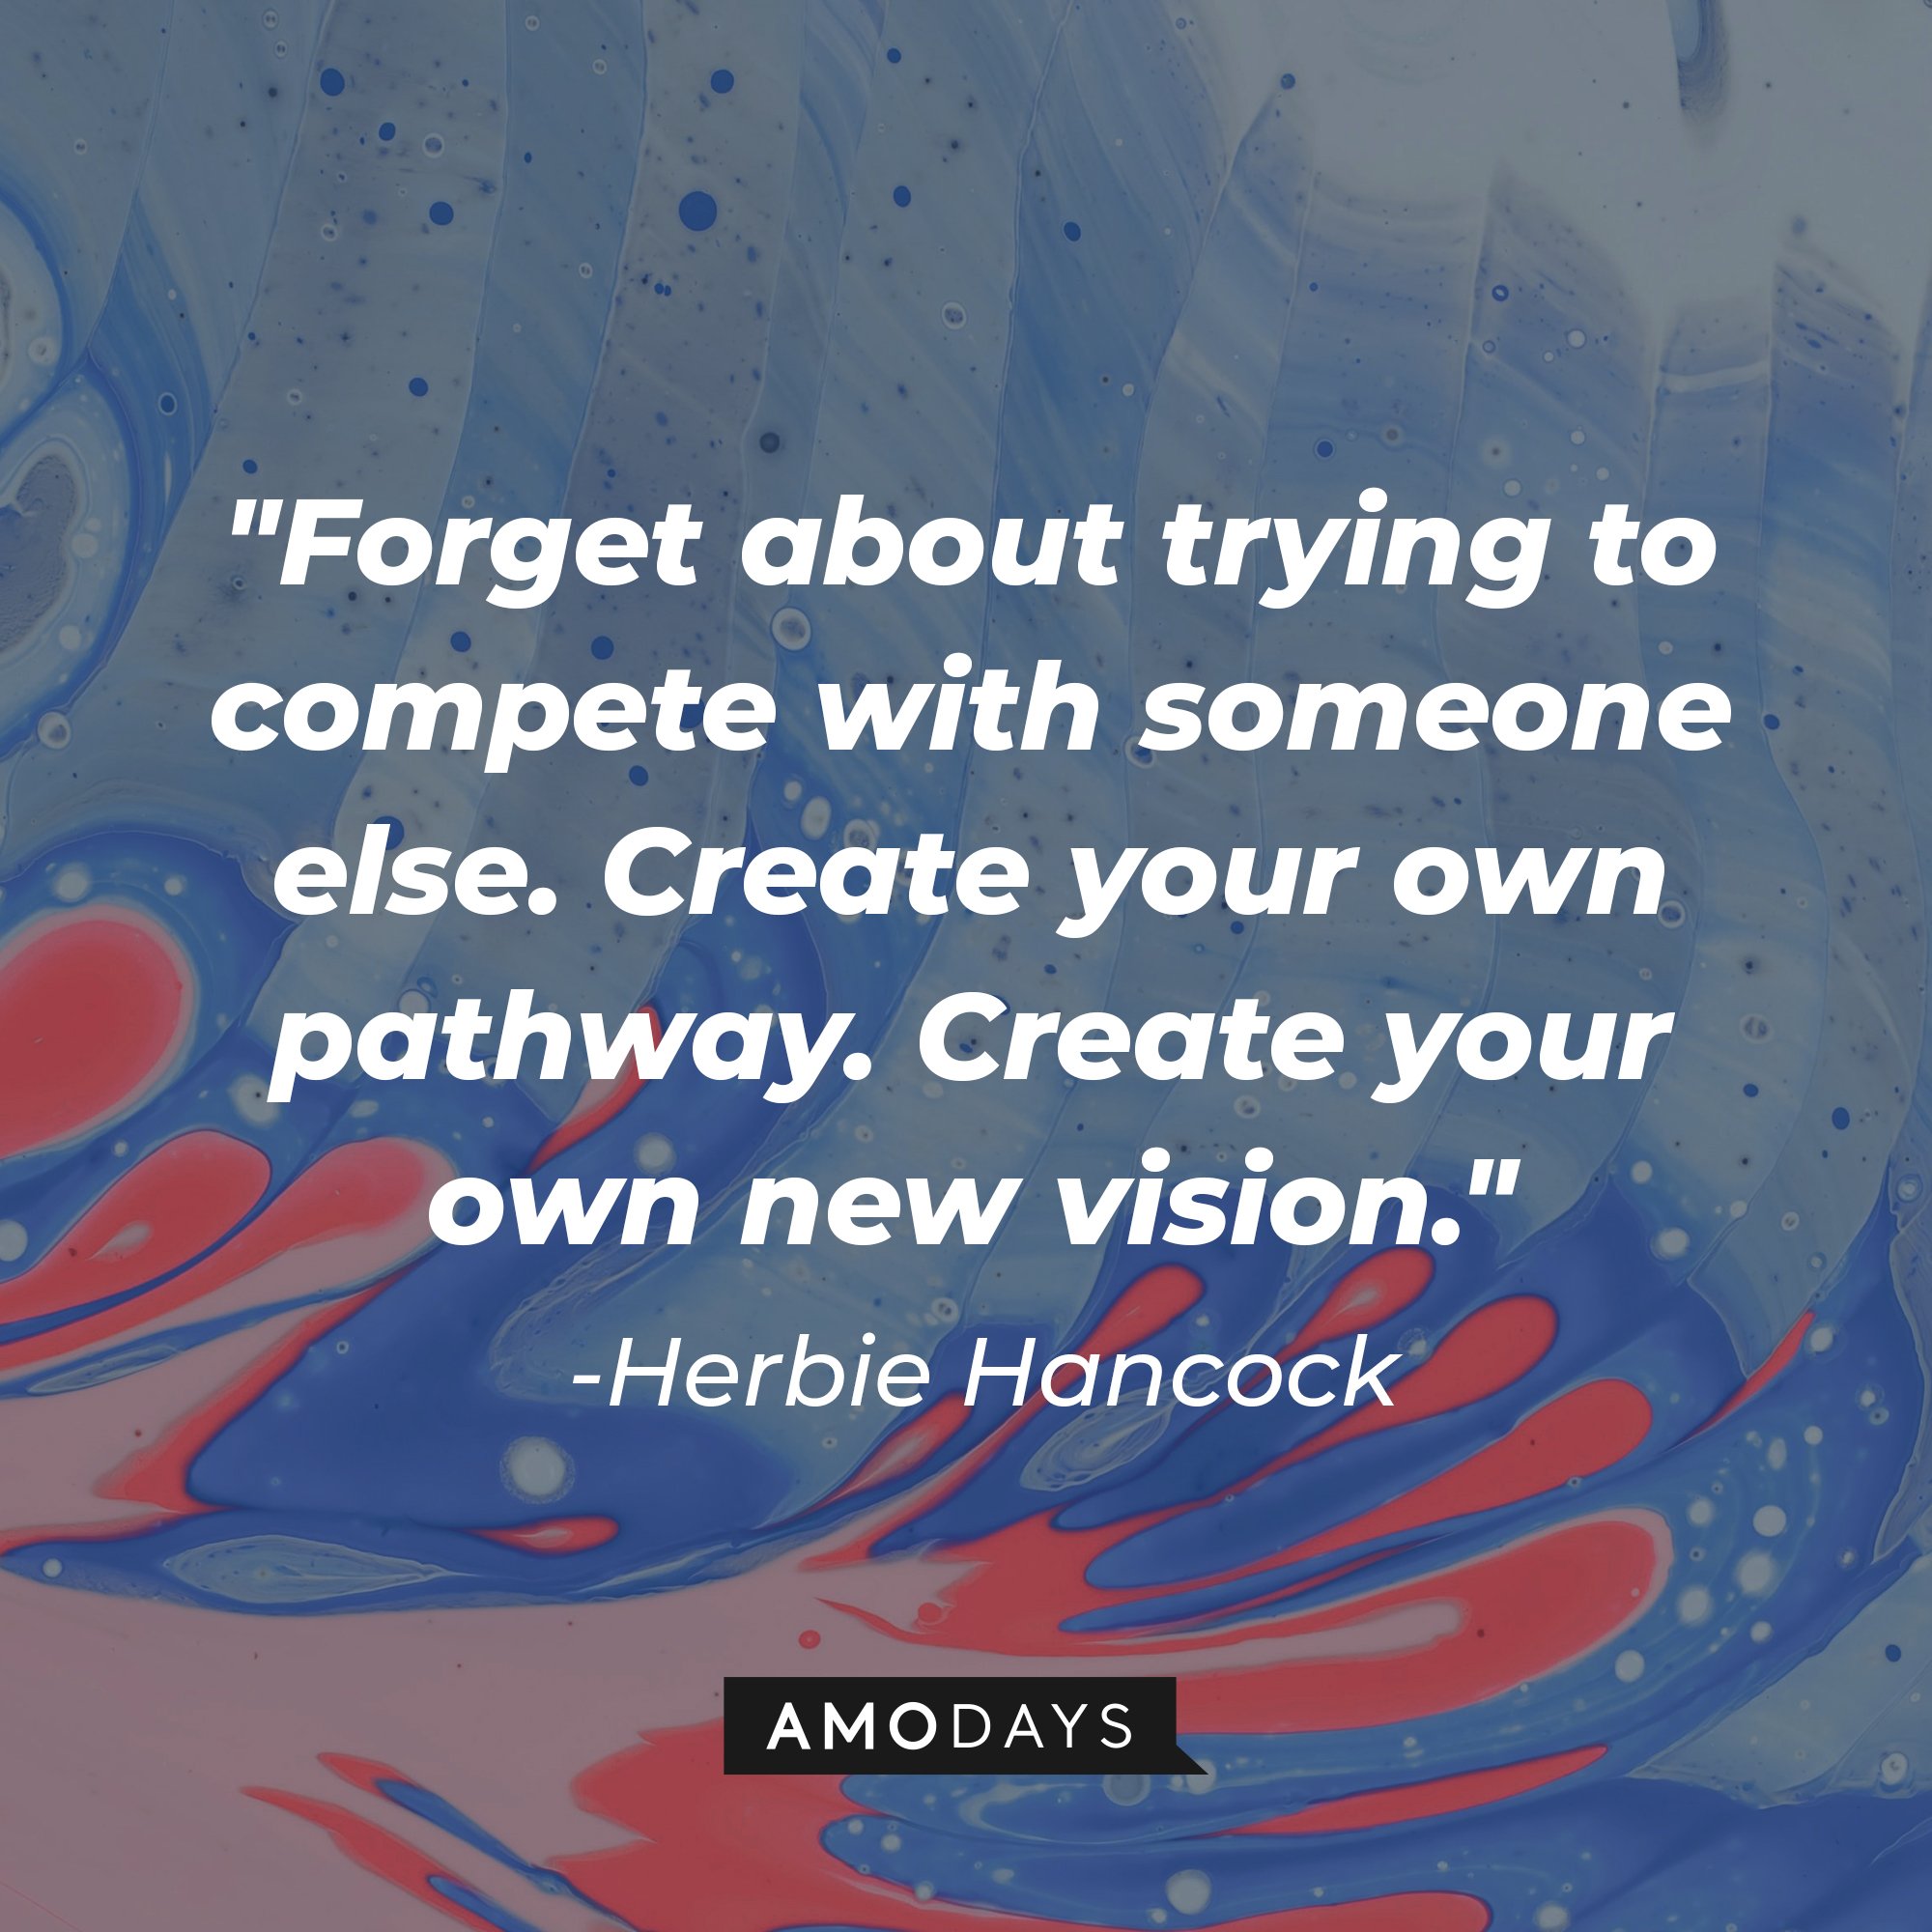 Herbie Hancock’s quote: "Forget about trying to compete with someone else. Create your own pathway. Create your own new vision." | Image: AmoDays